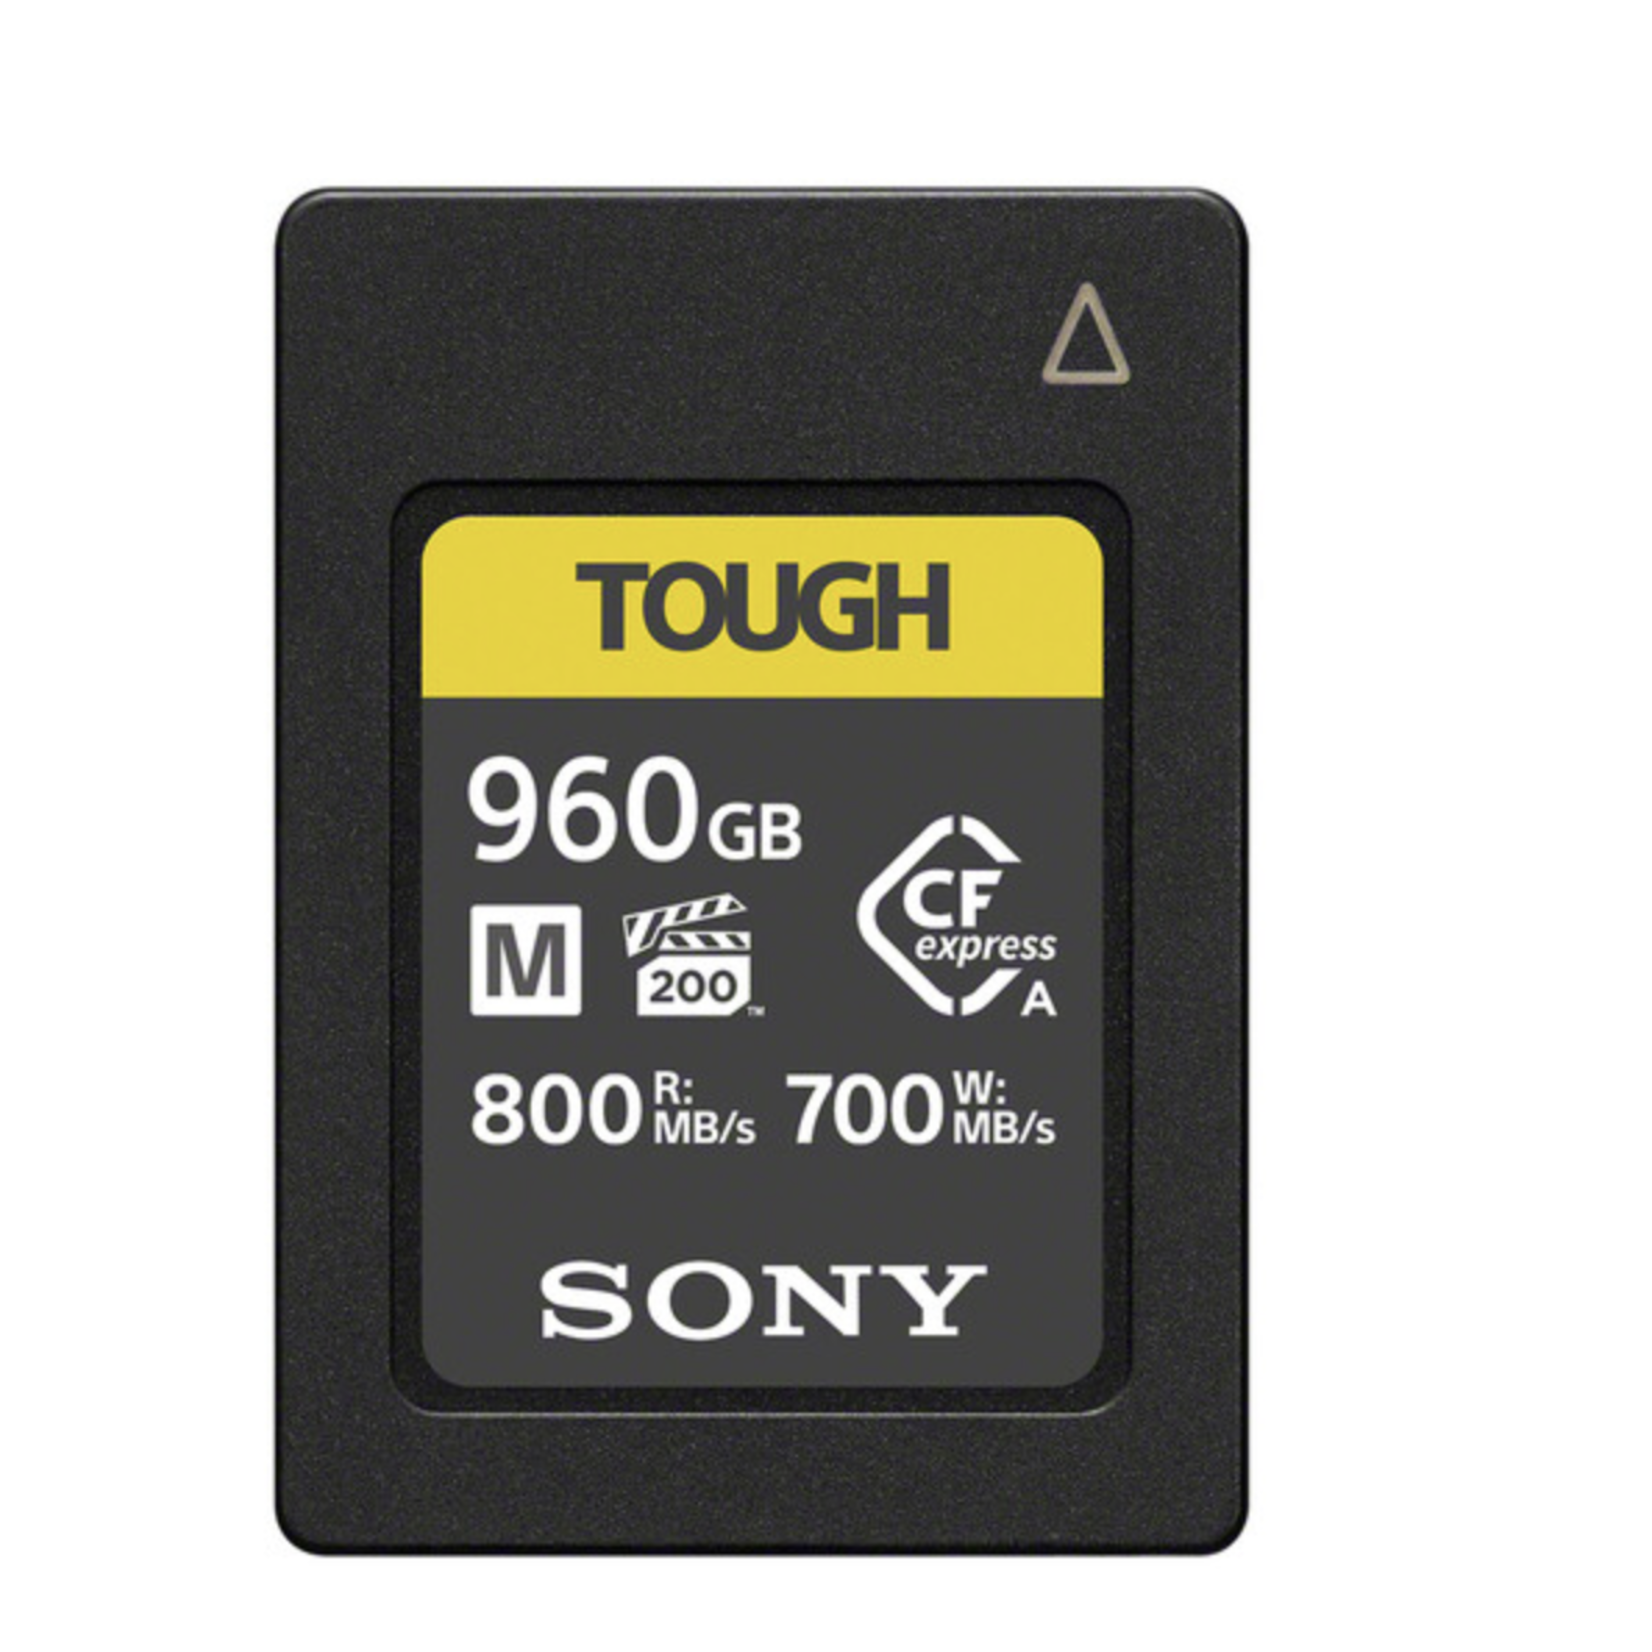 Sony Sony 960GB CFexpress Type A TOUGH Memory Card